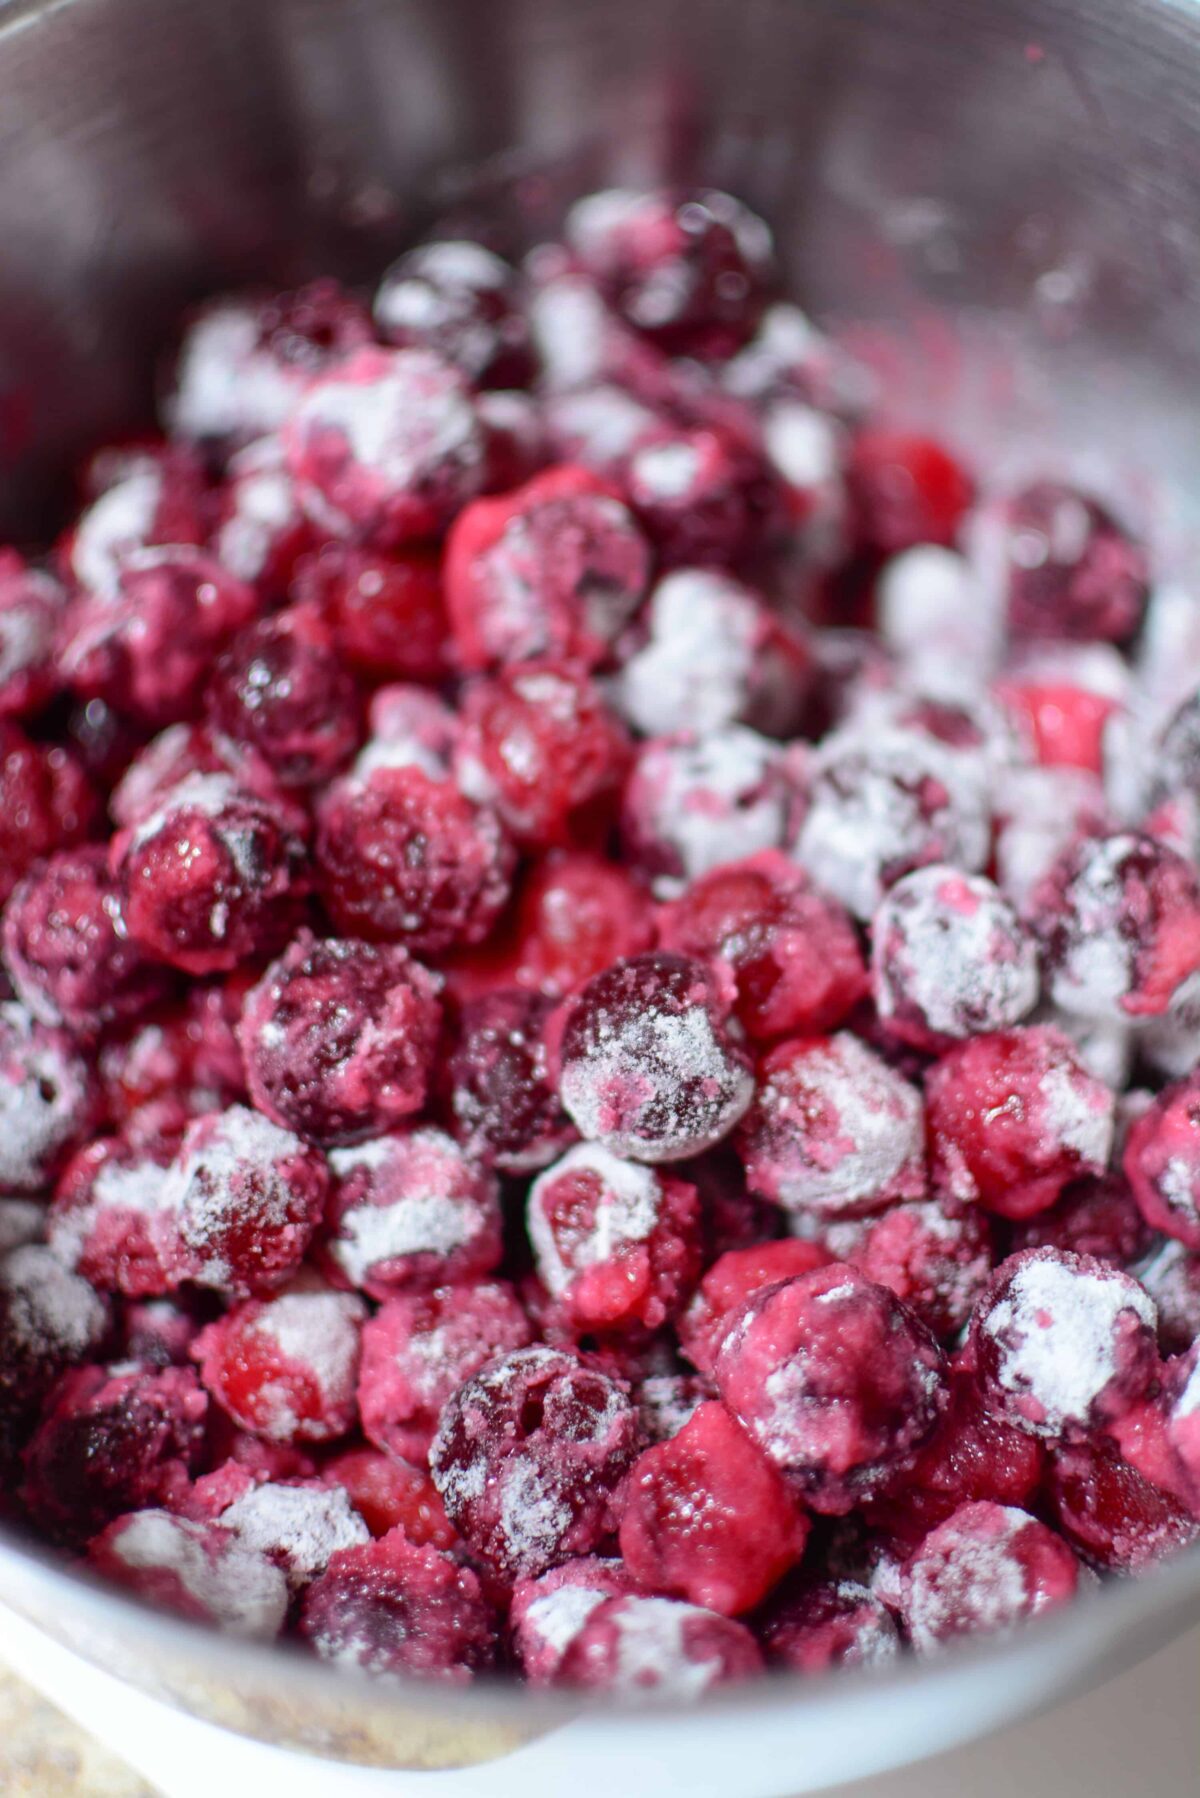 Sour cherries covered in flour and sugar in a bowl.